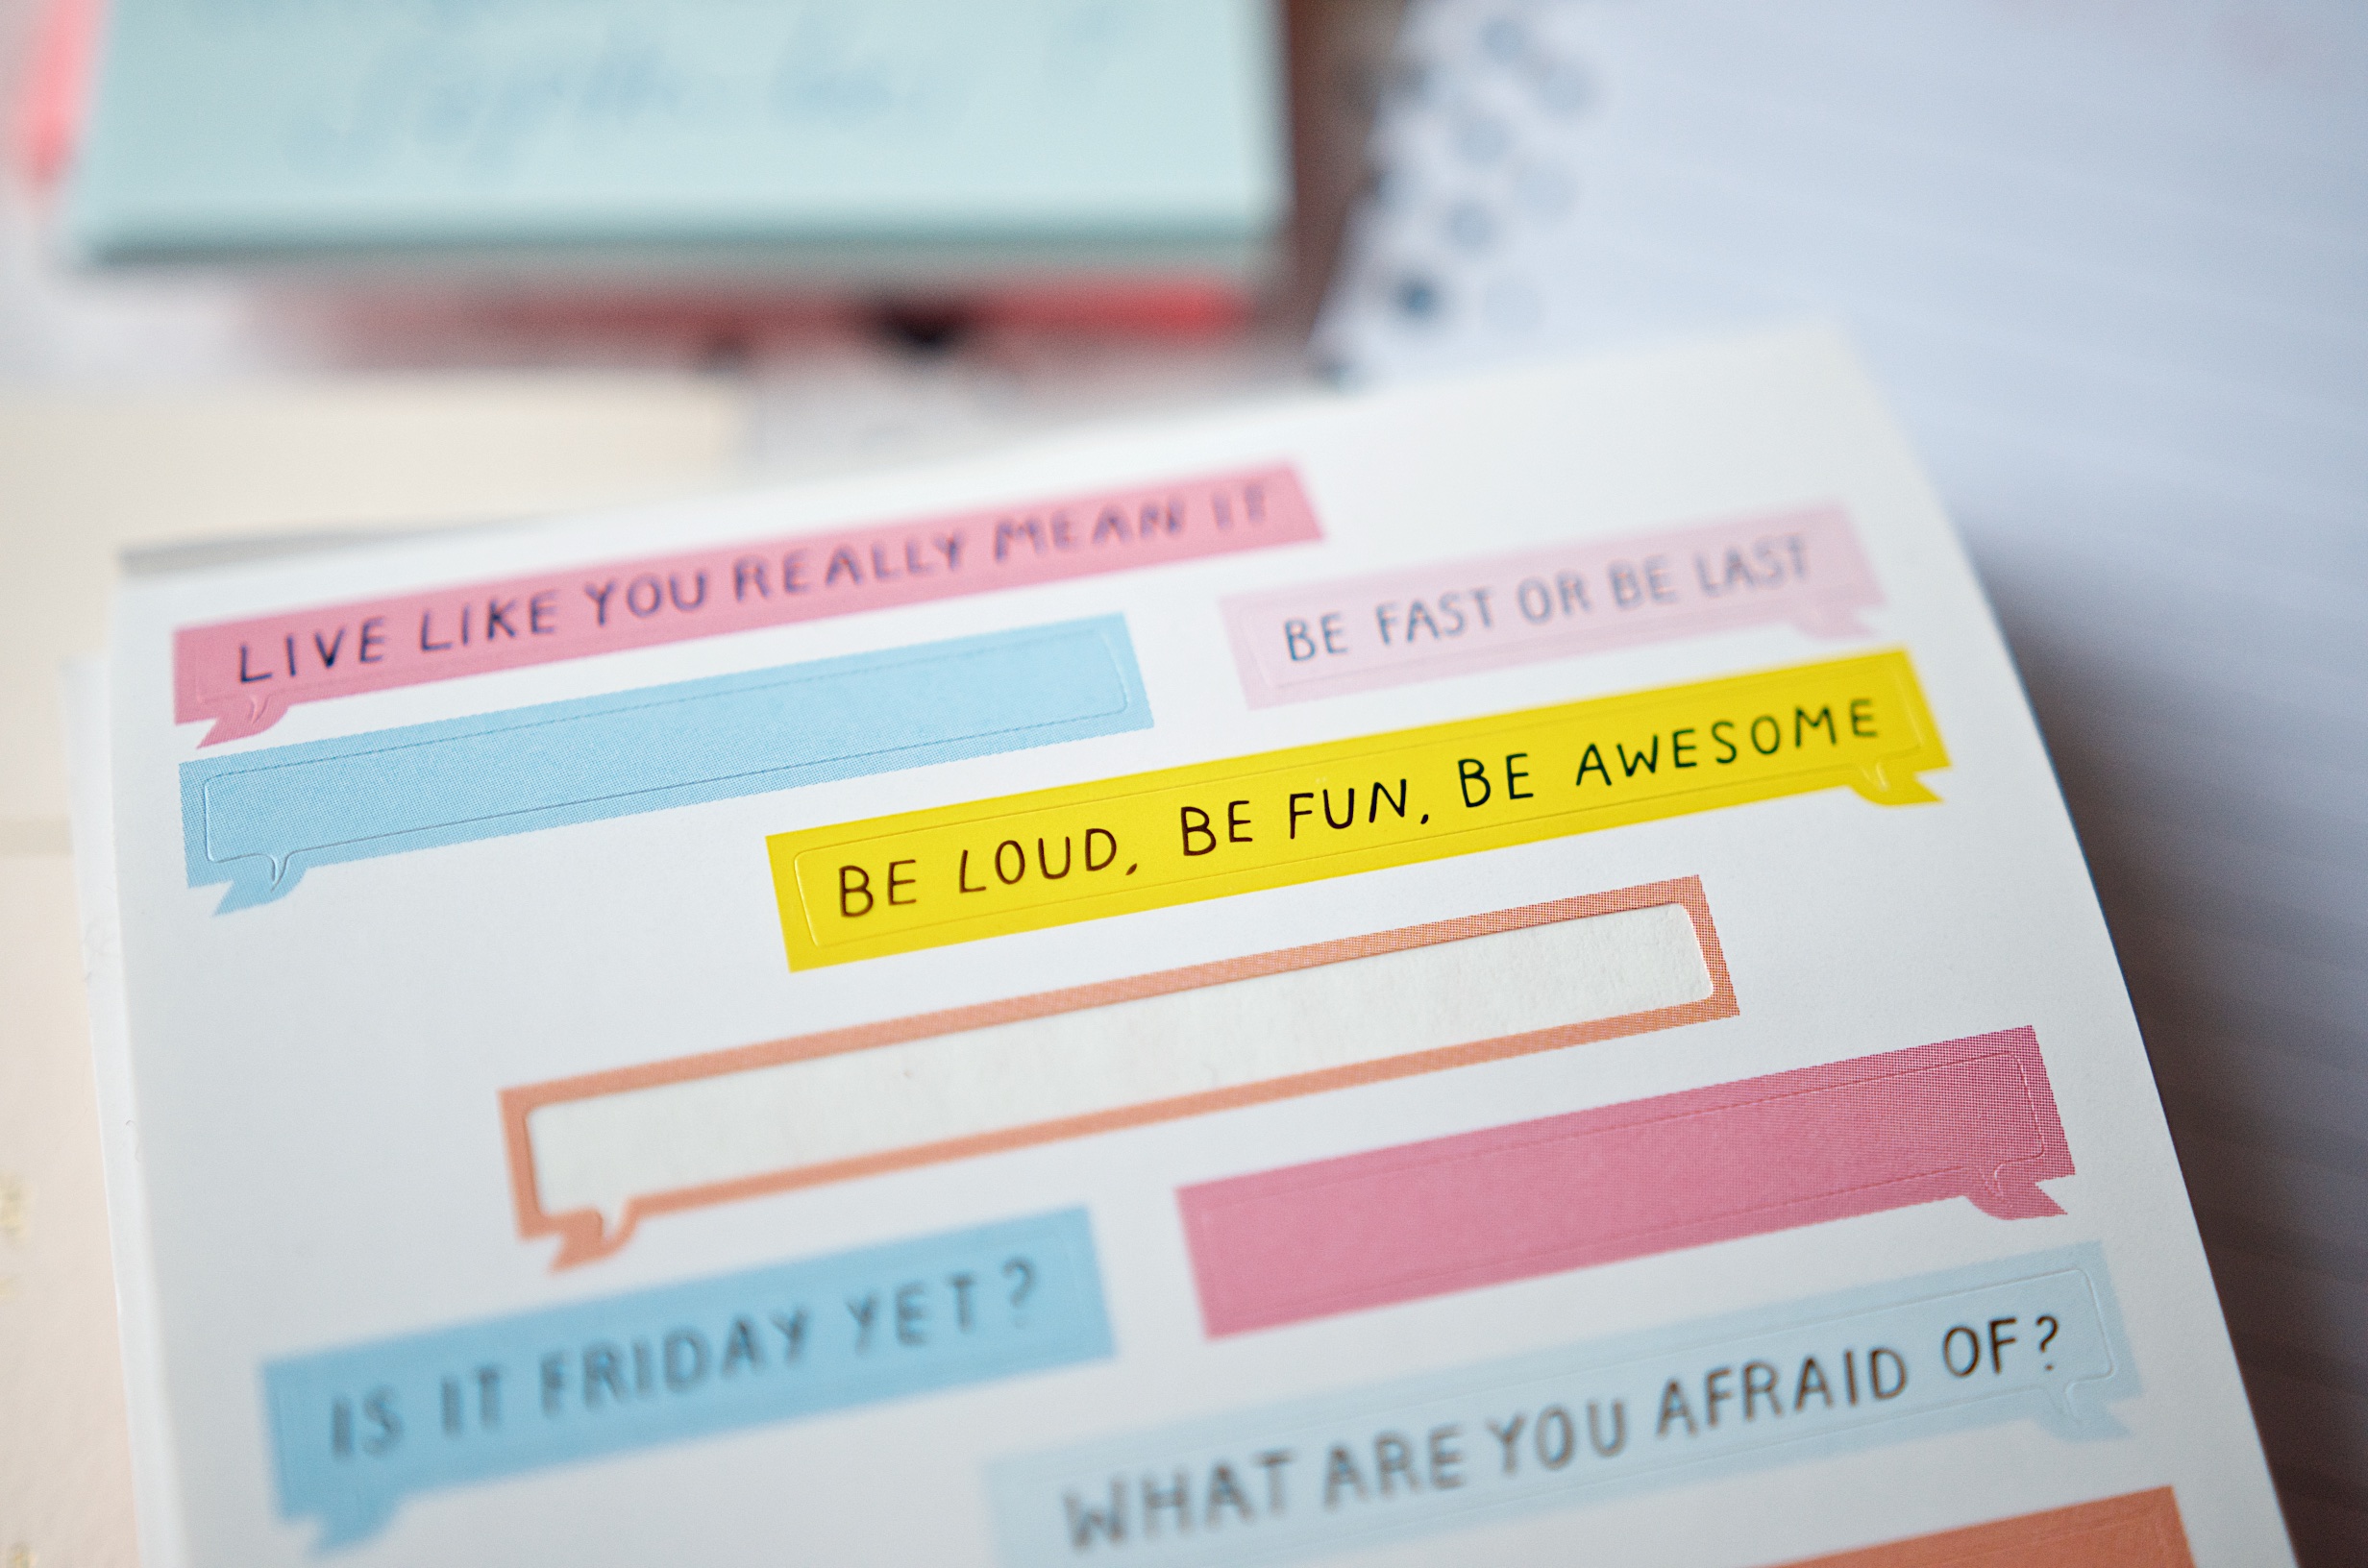 Be loud, be fun, be awesome. Be fast or be last. So wahr. Sticker für Journal von ban.do